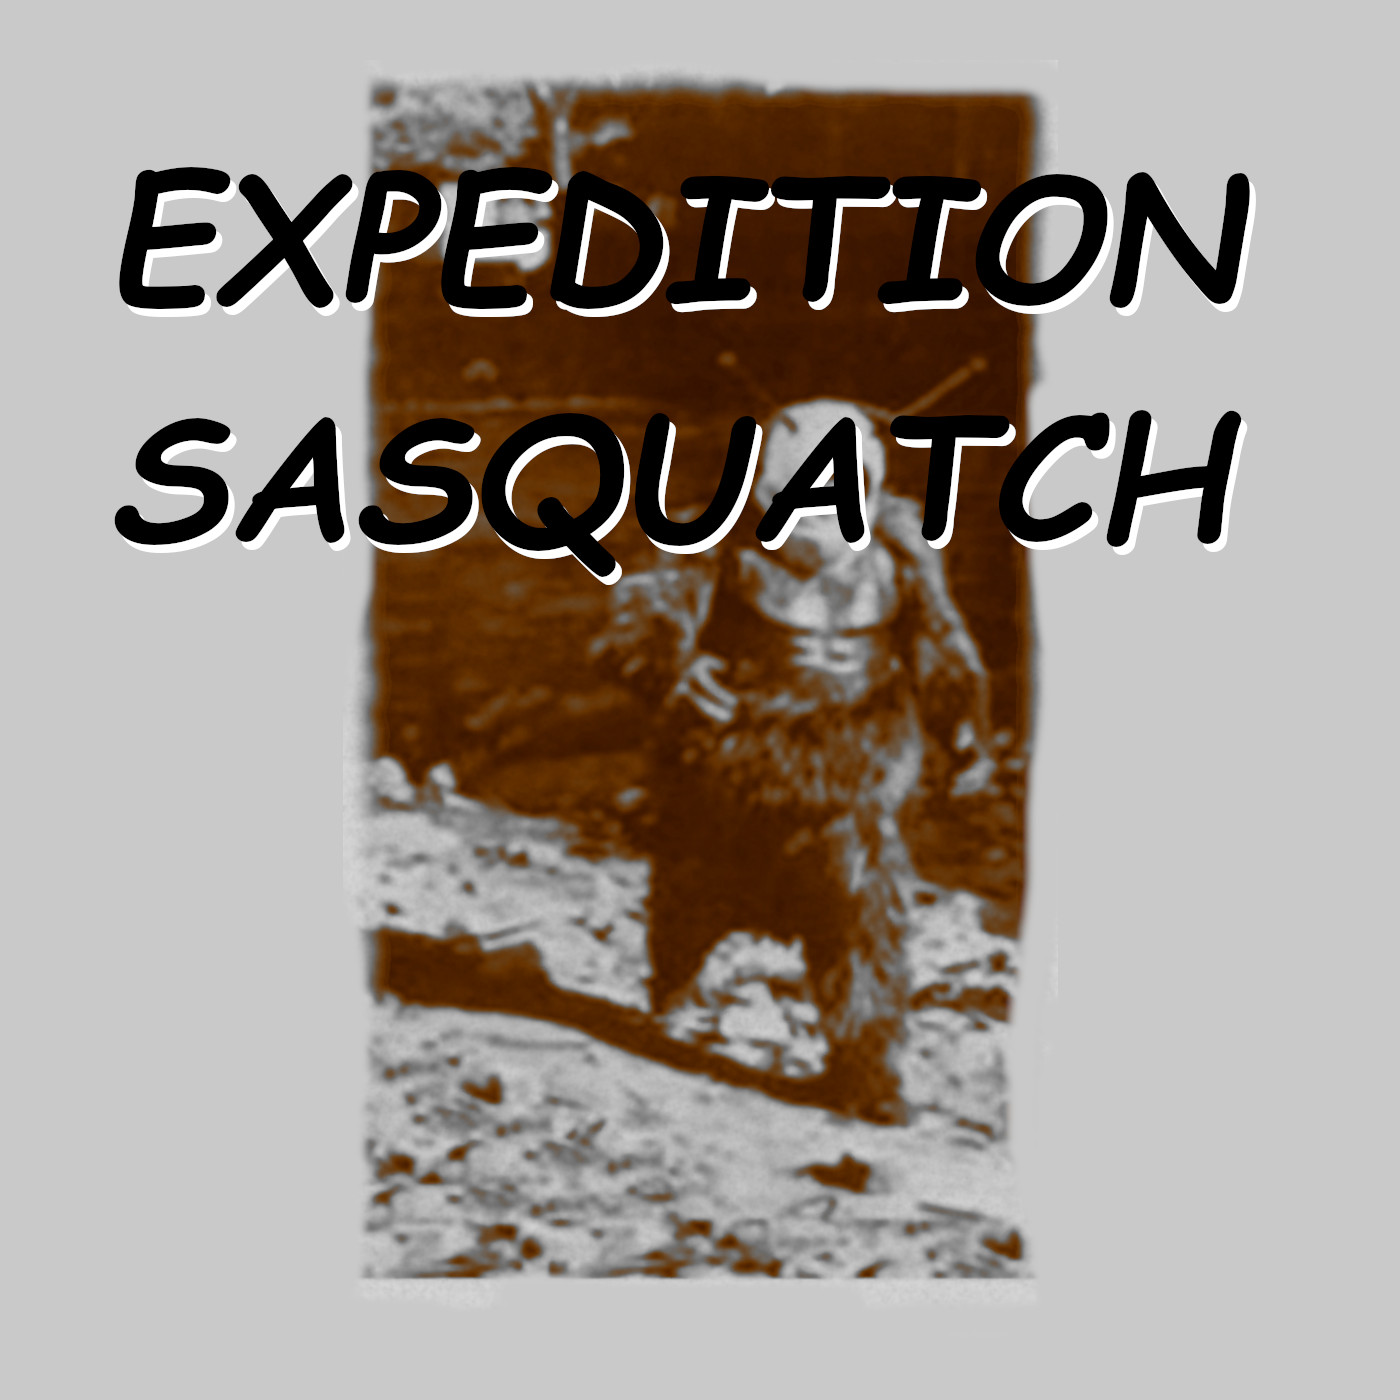 EXPEDITION SASQUATCH RETURNS - FINDING NOTHING